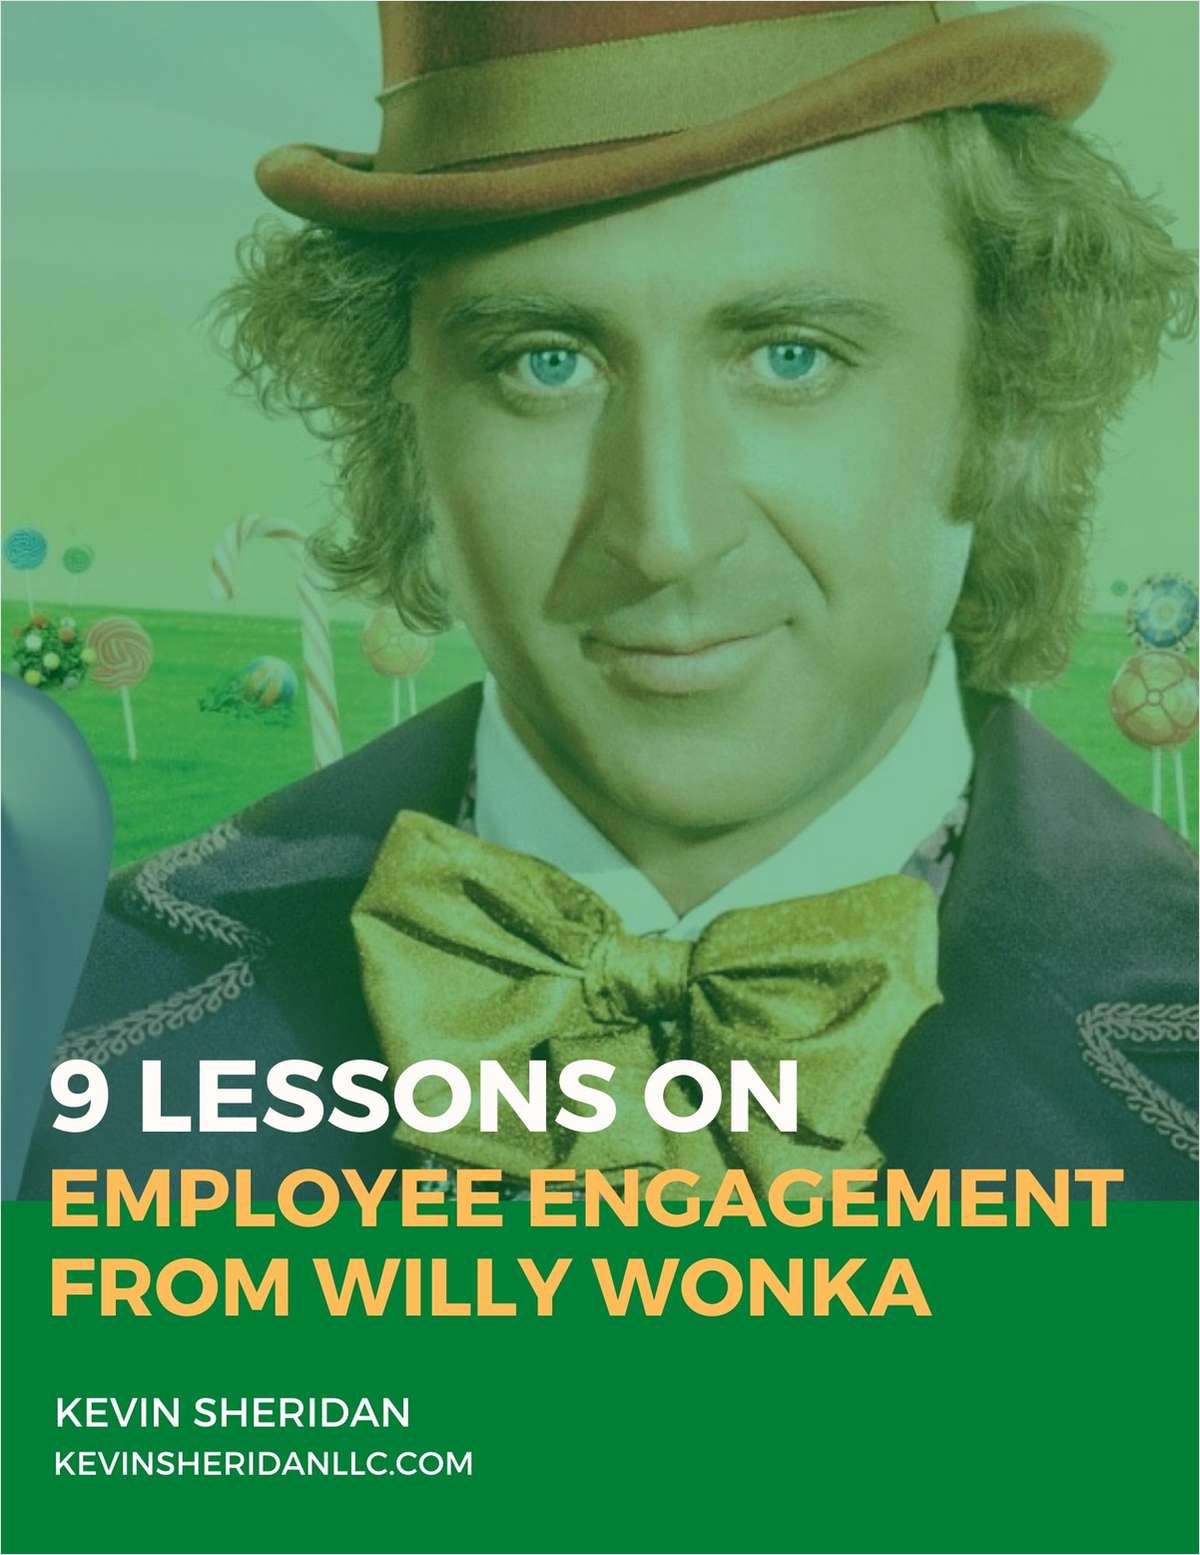 9 Lessons on Employee Engagement from Willy Wonka